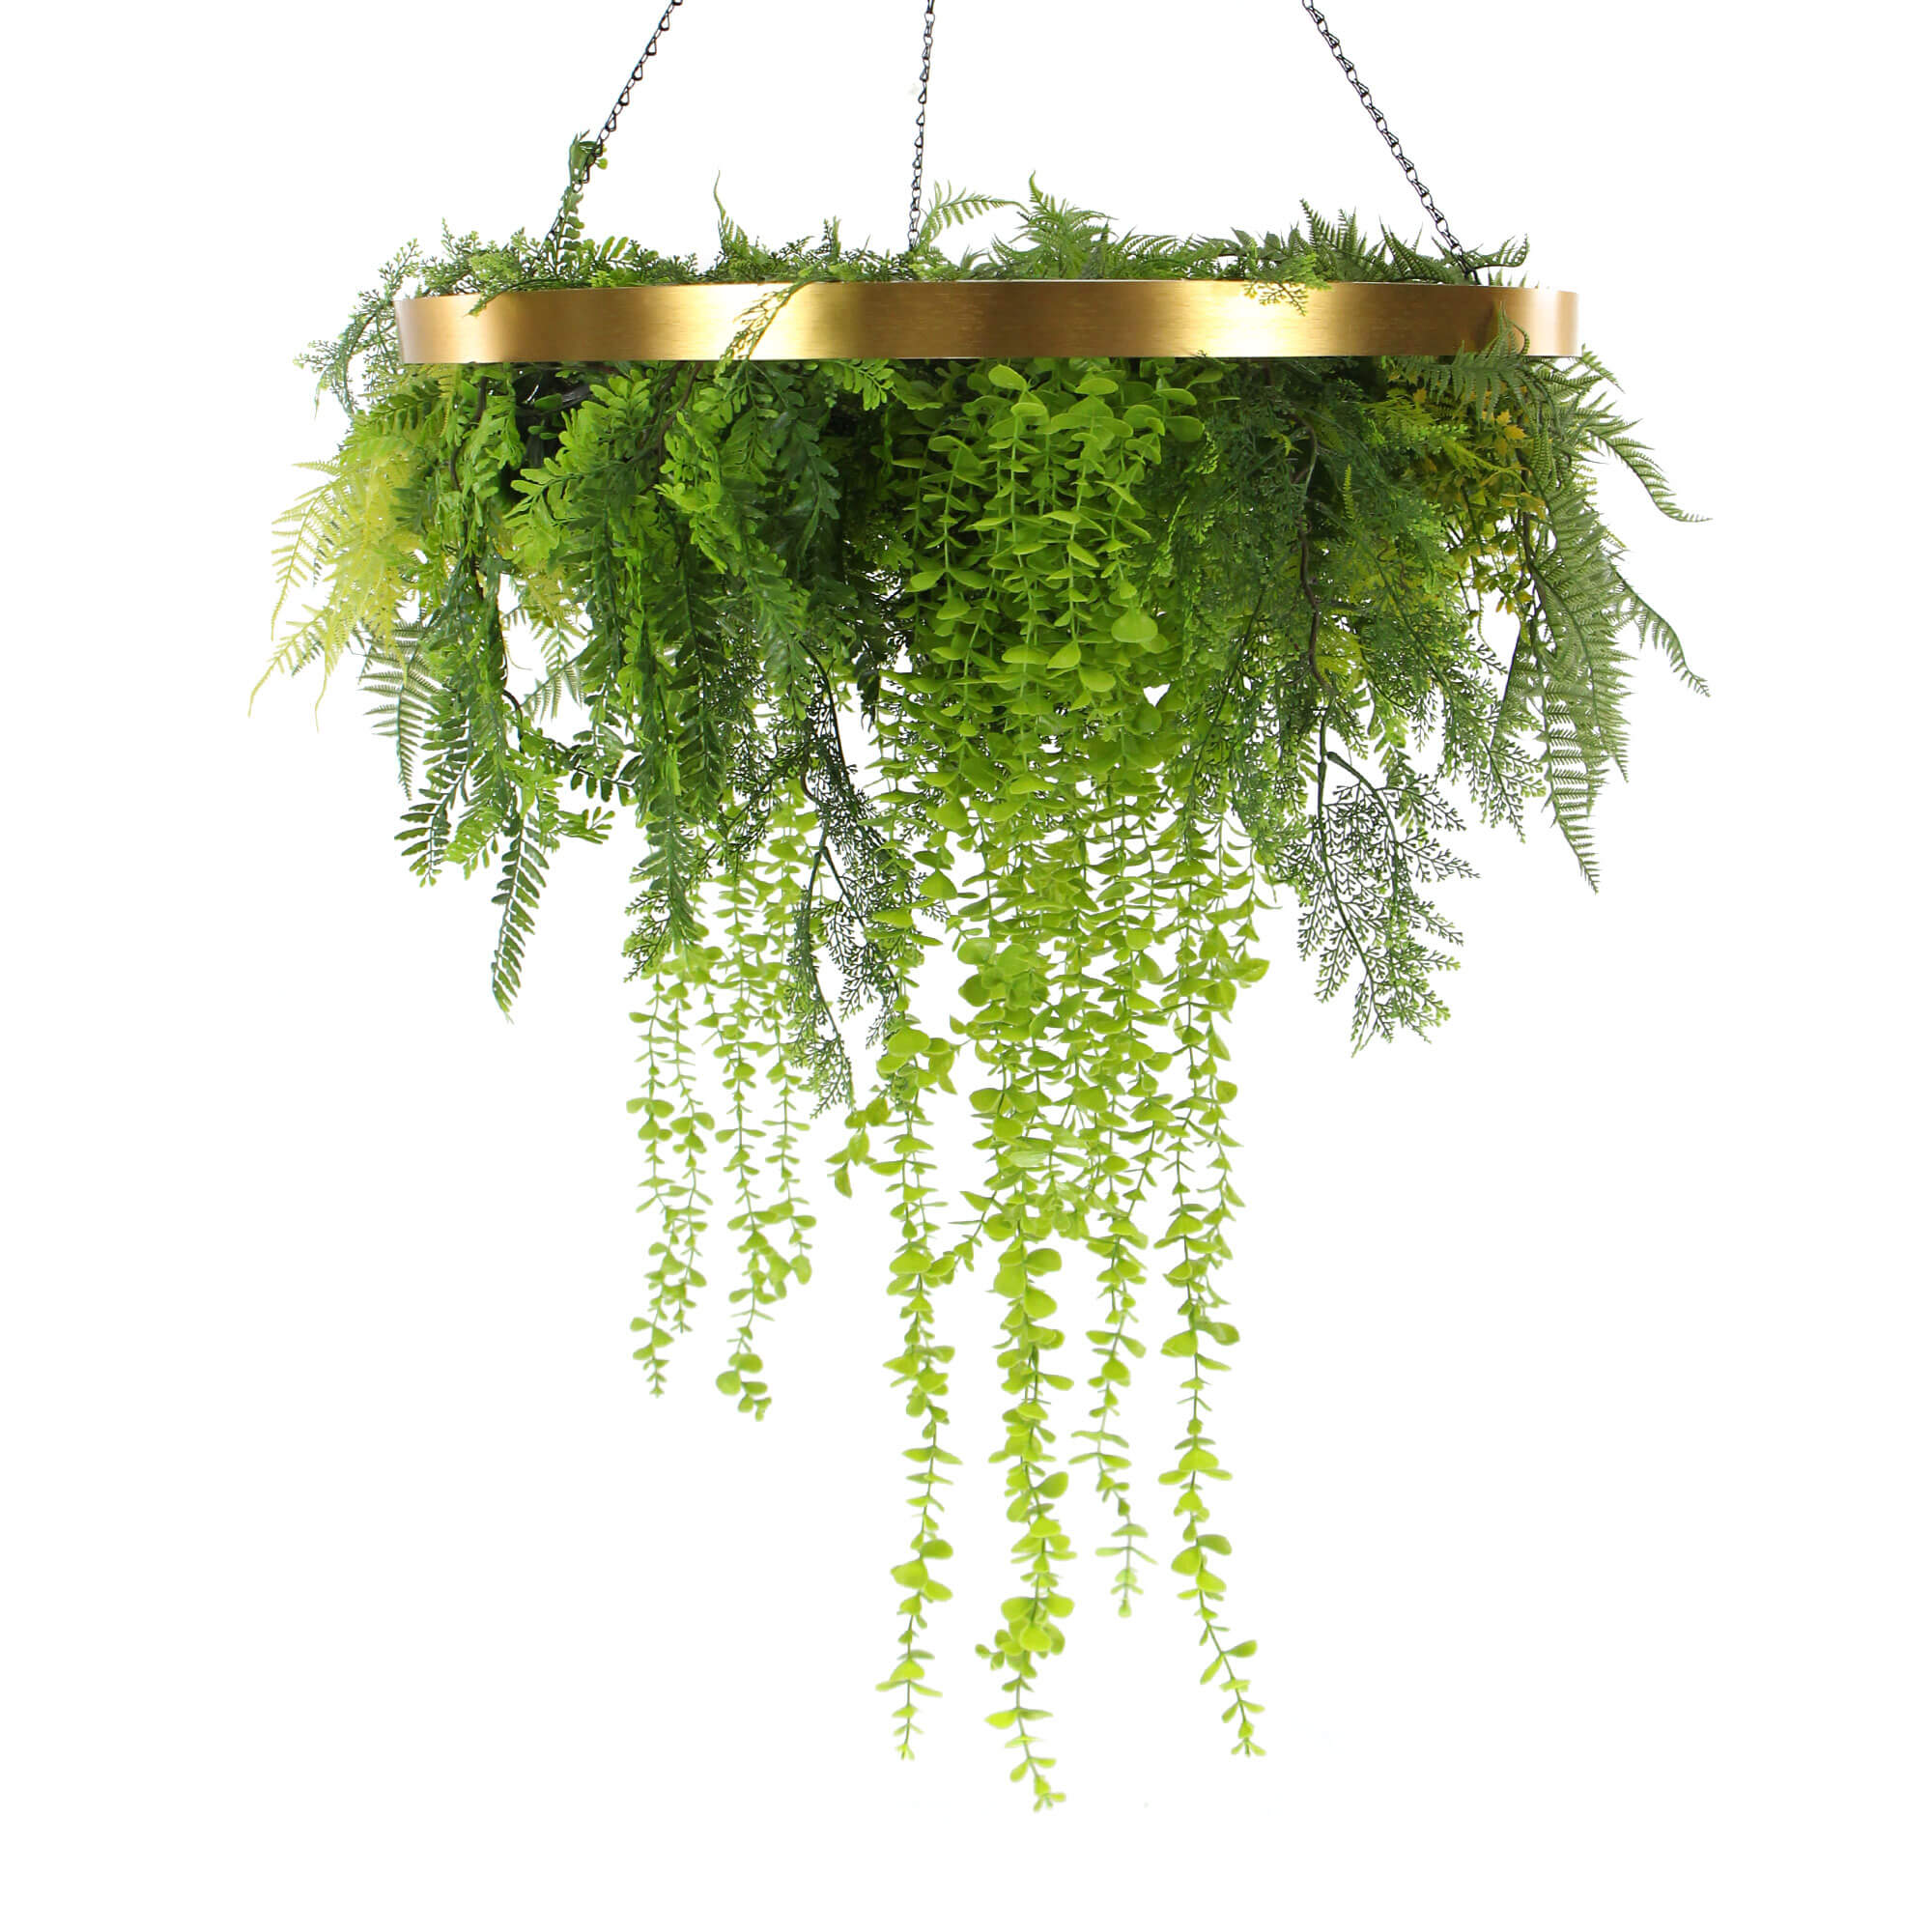 imitation-gold-artificial-hanging-green-wall-disc-80cm-limited-edition-uv-resistant-foliage-628832.jpg